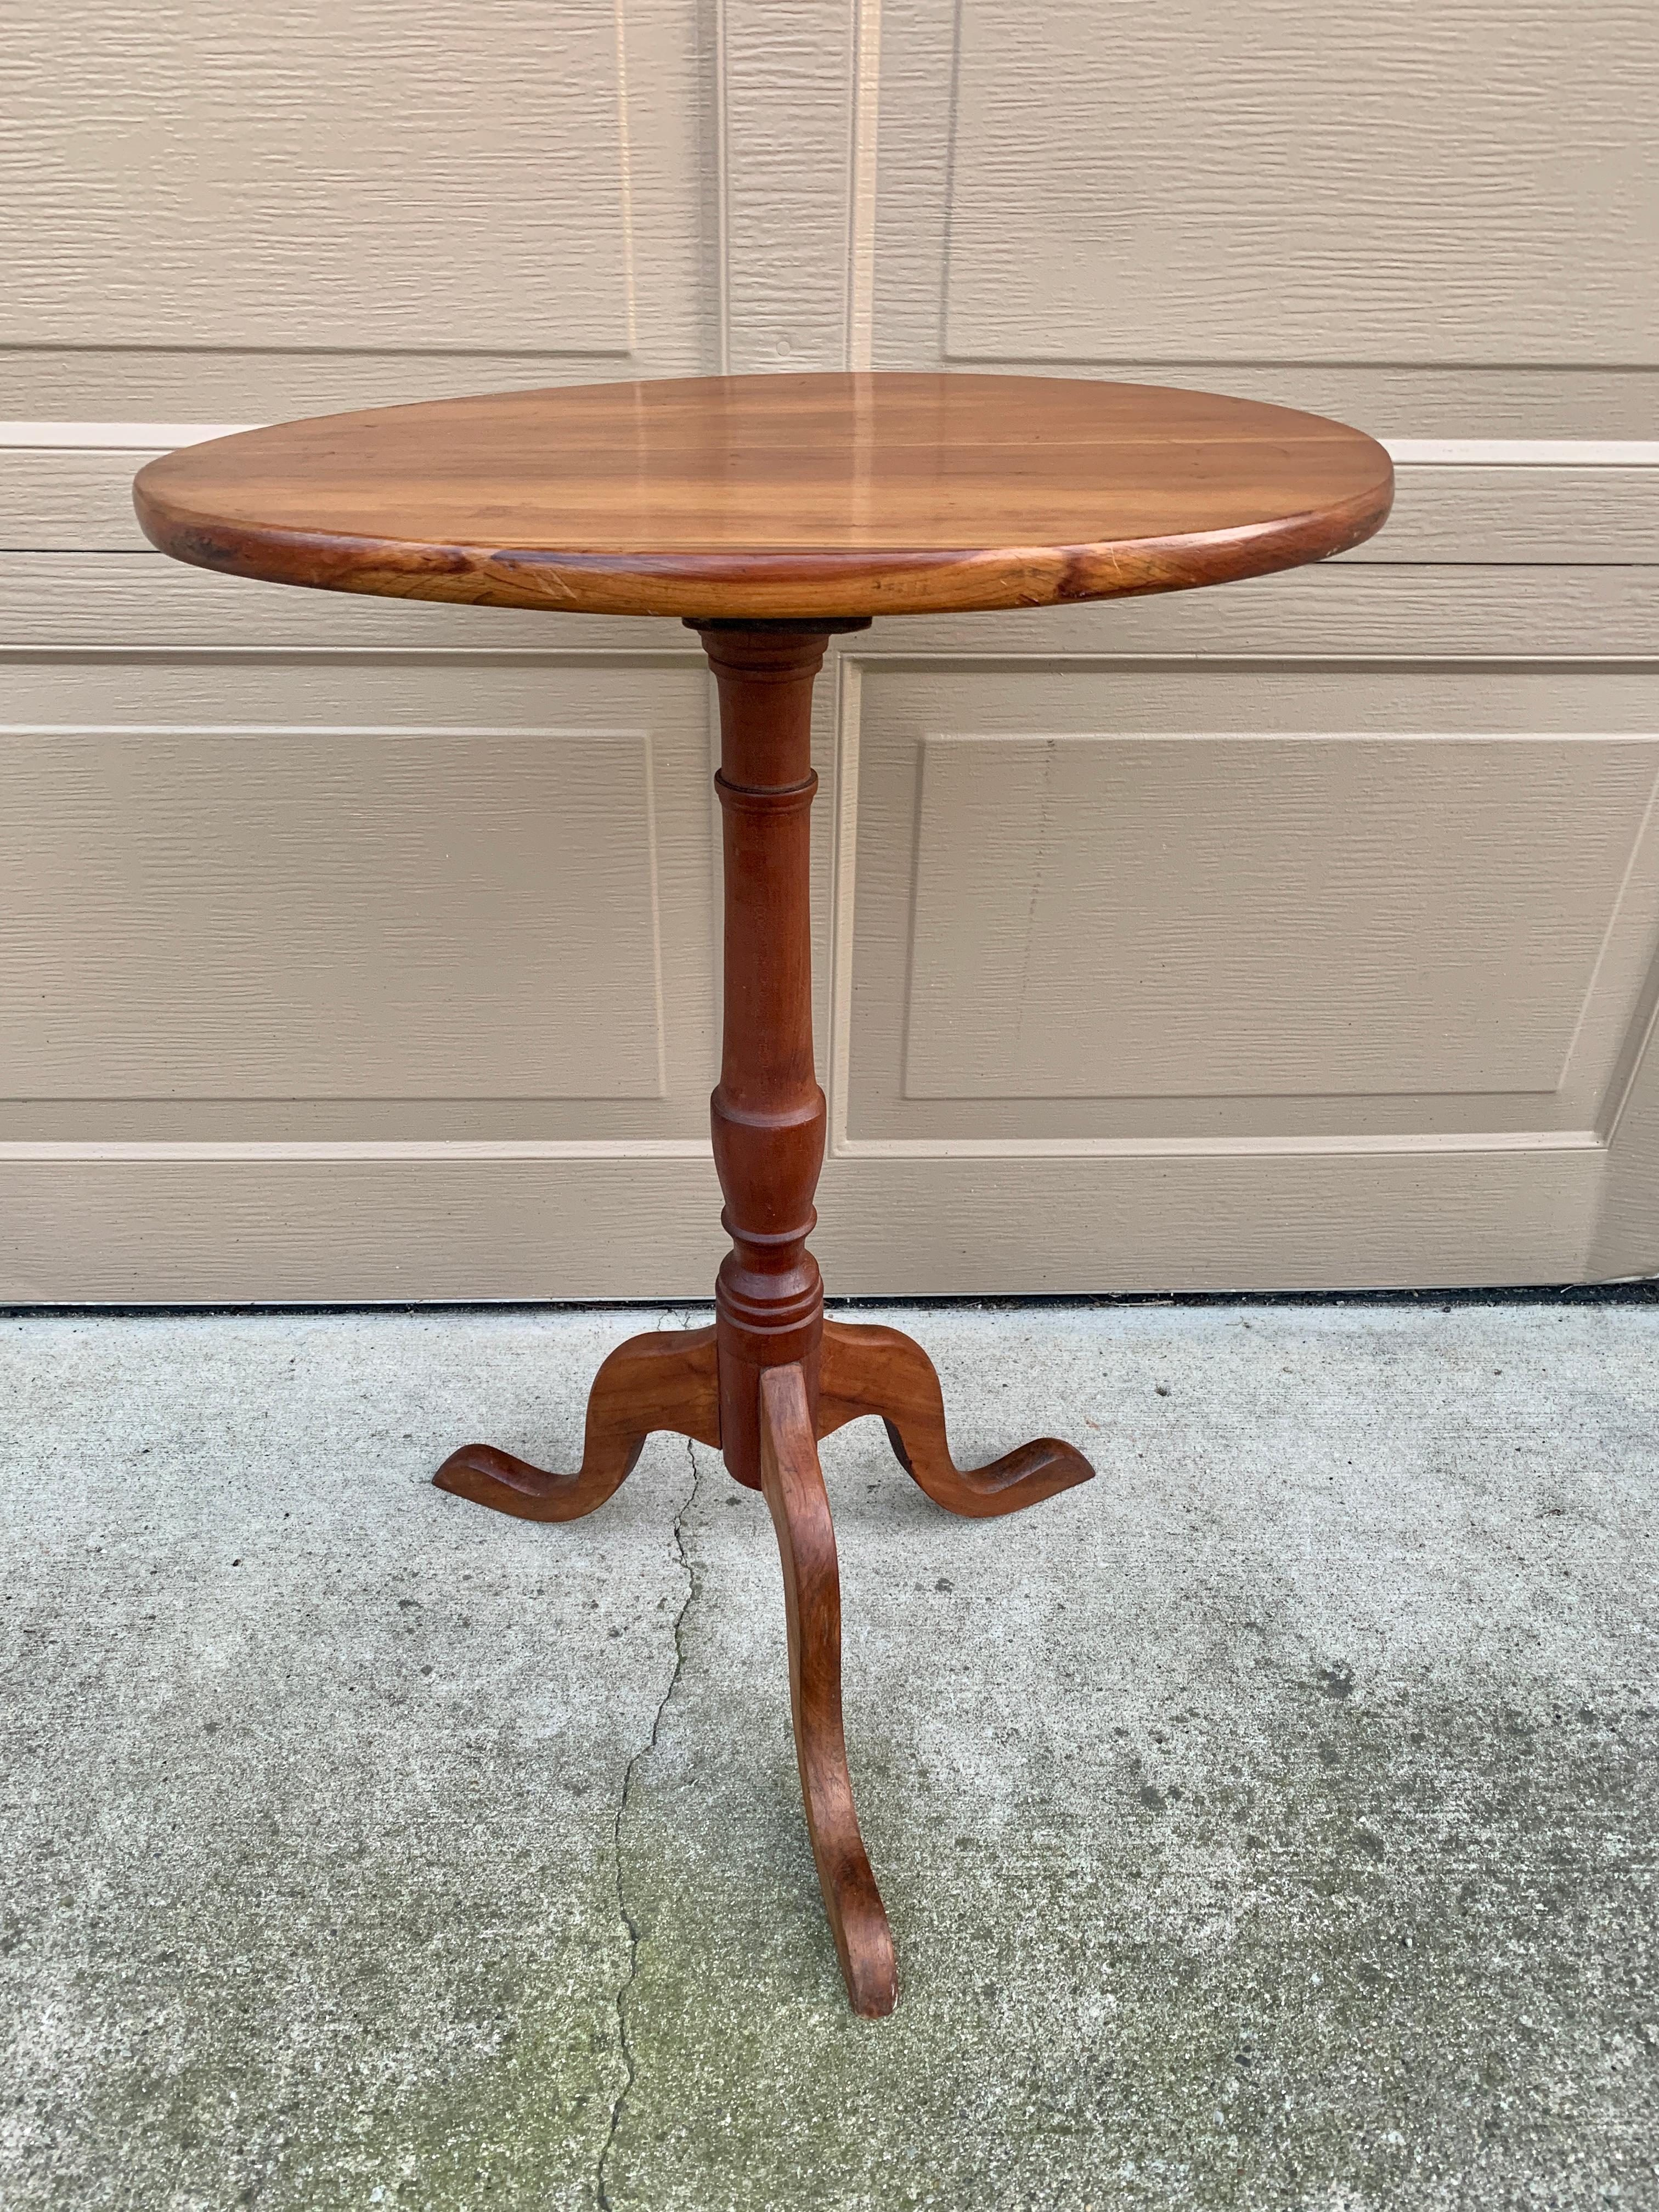 Antique American Colonial Cherry Candle Stand or Side Table, Mid 19th Century For Sale 6